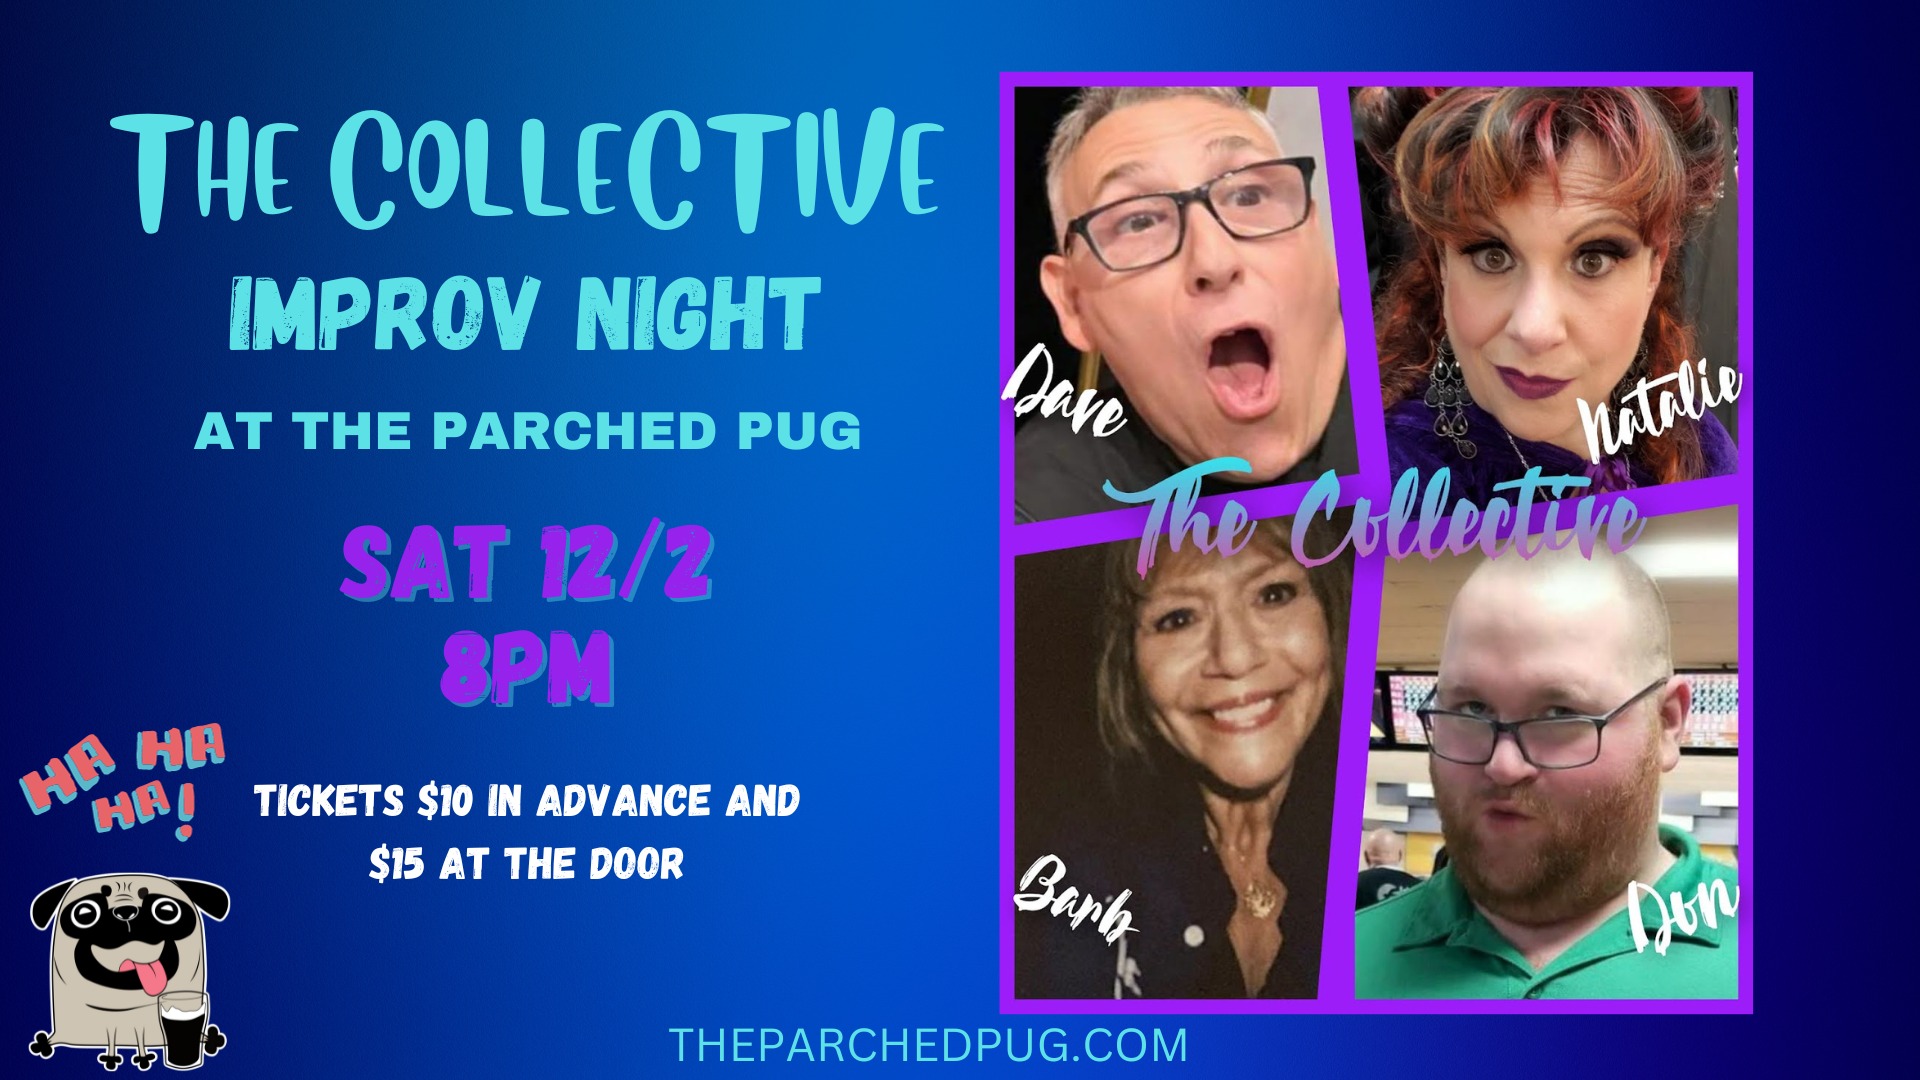 The Collective Improv Night at The Parched Pug